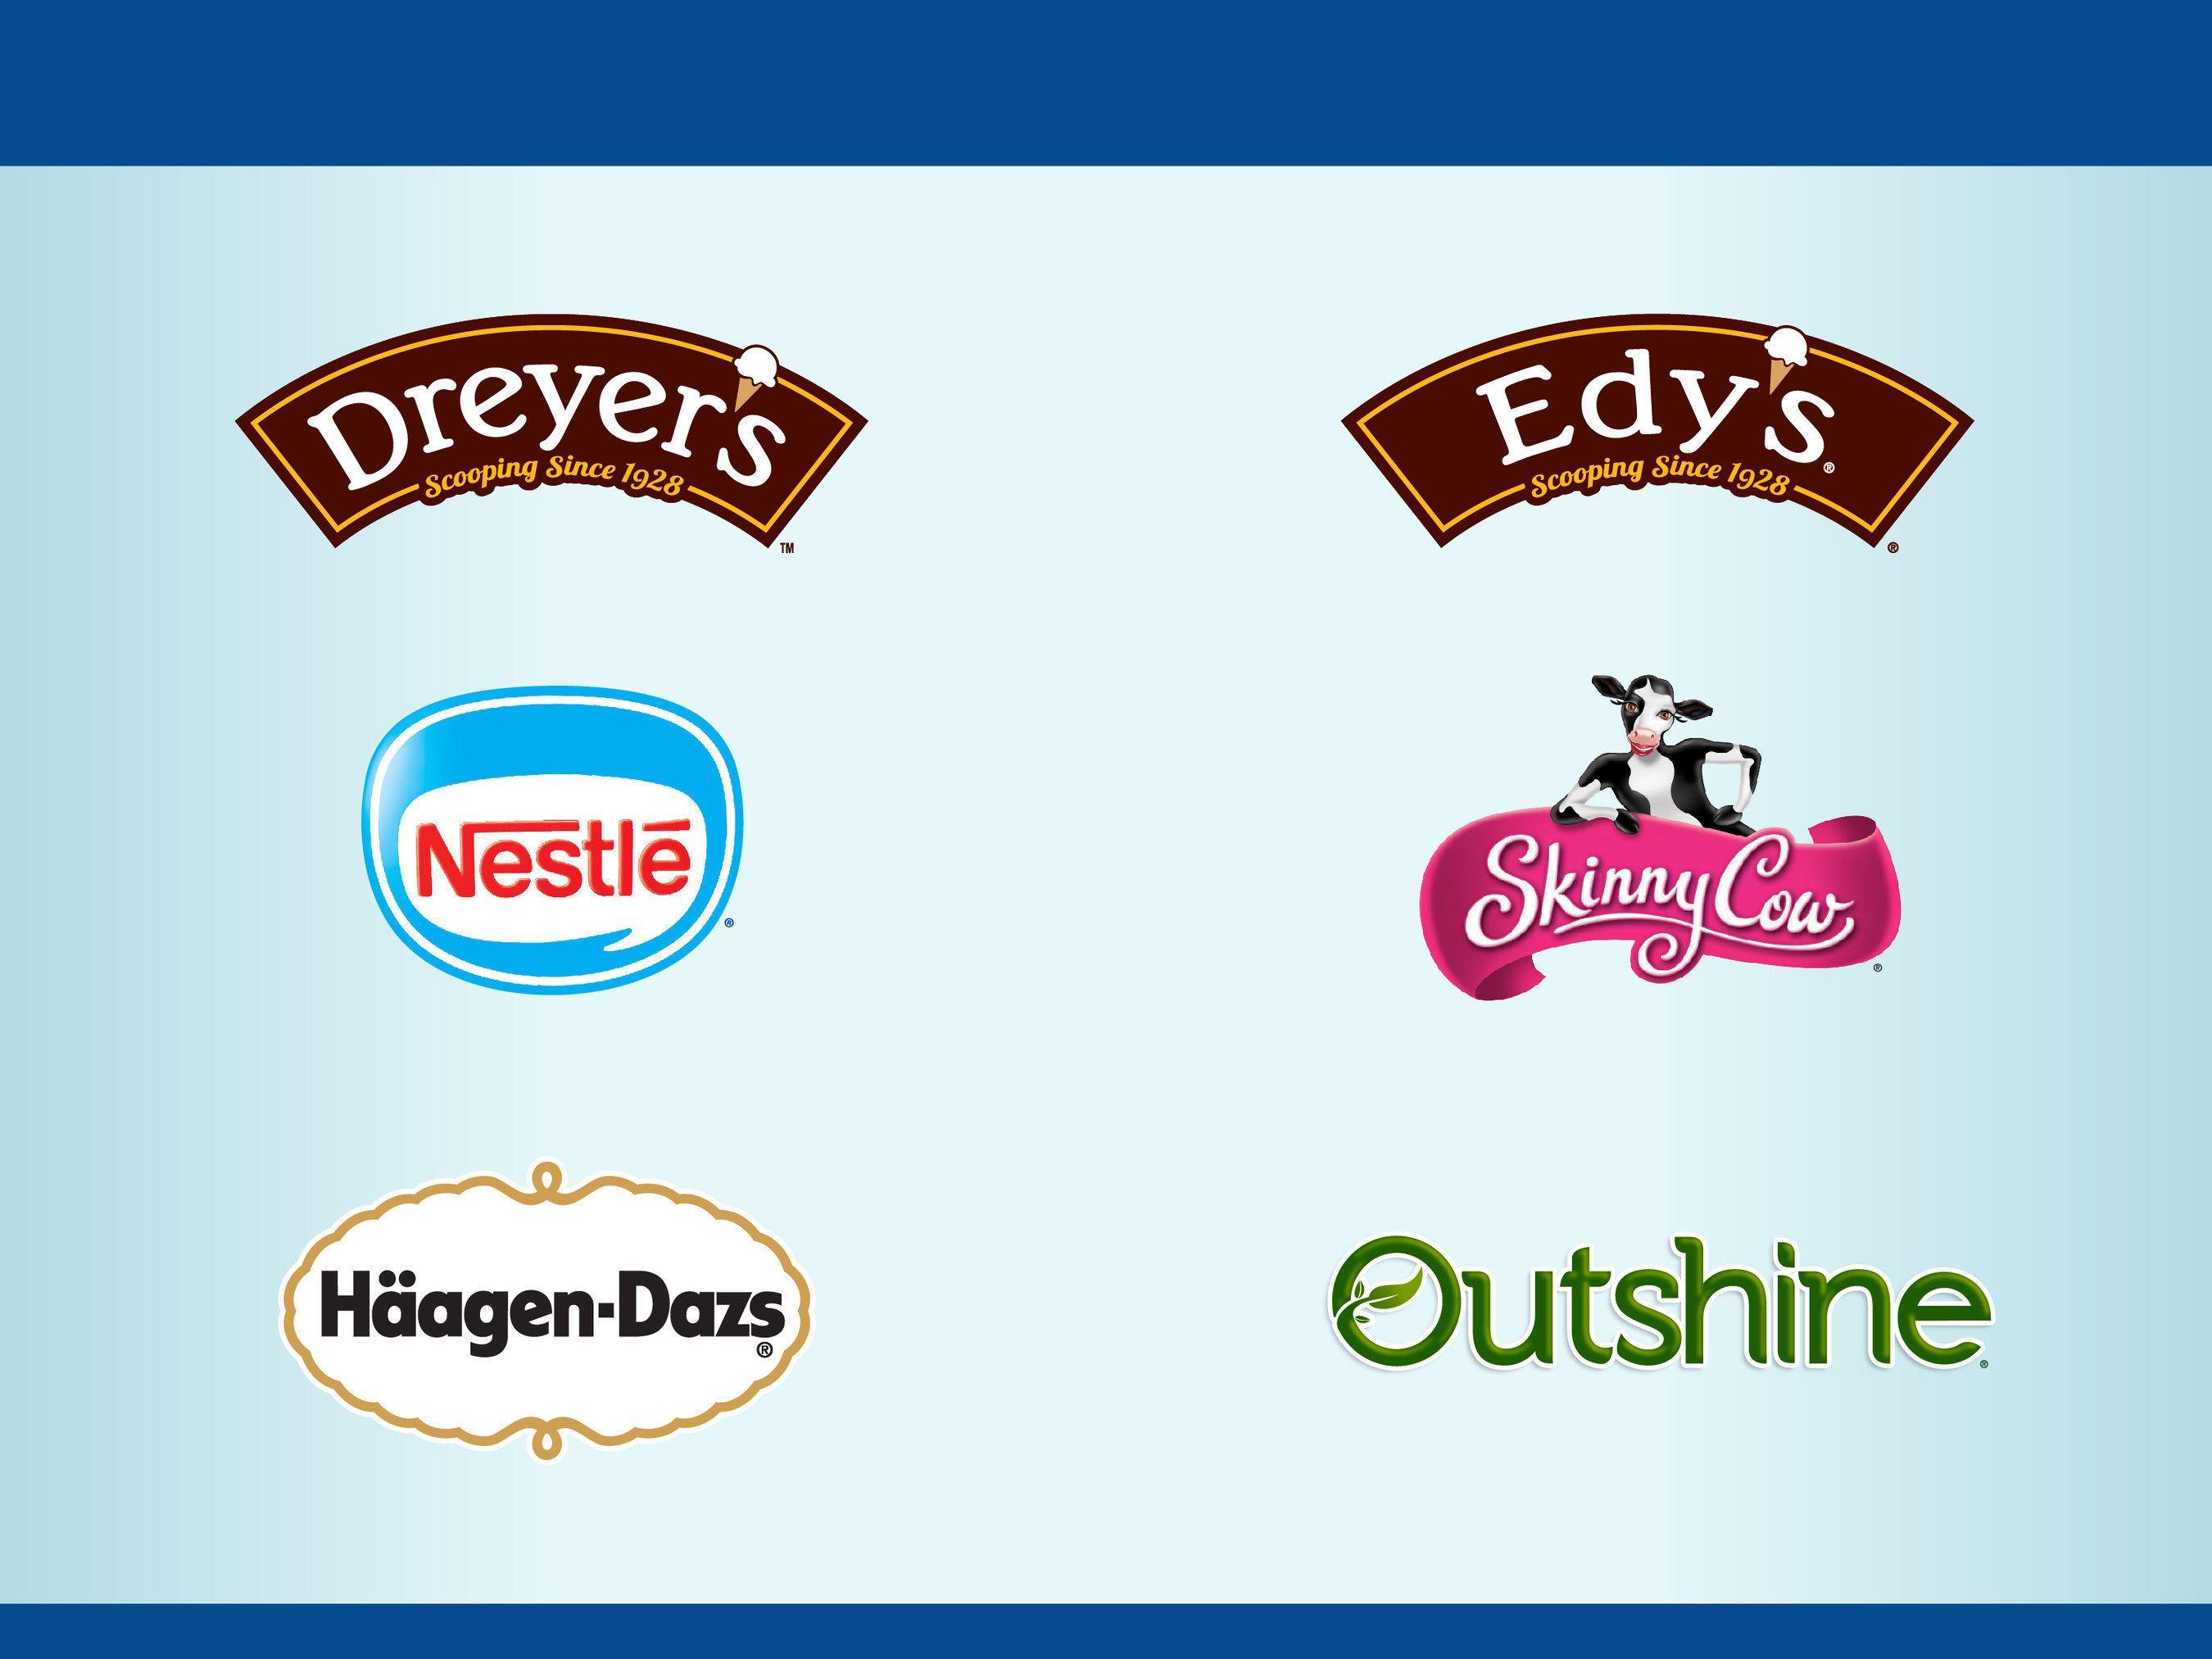 Dreyer's Logo - Nestlé Raises The Bar On Ice Cream With Move To Simpler Ingredients